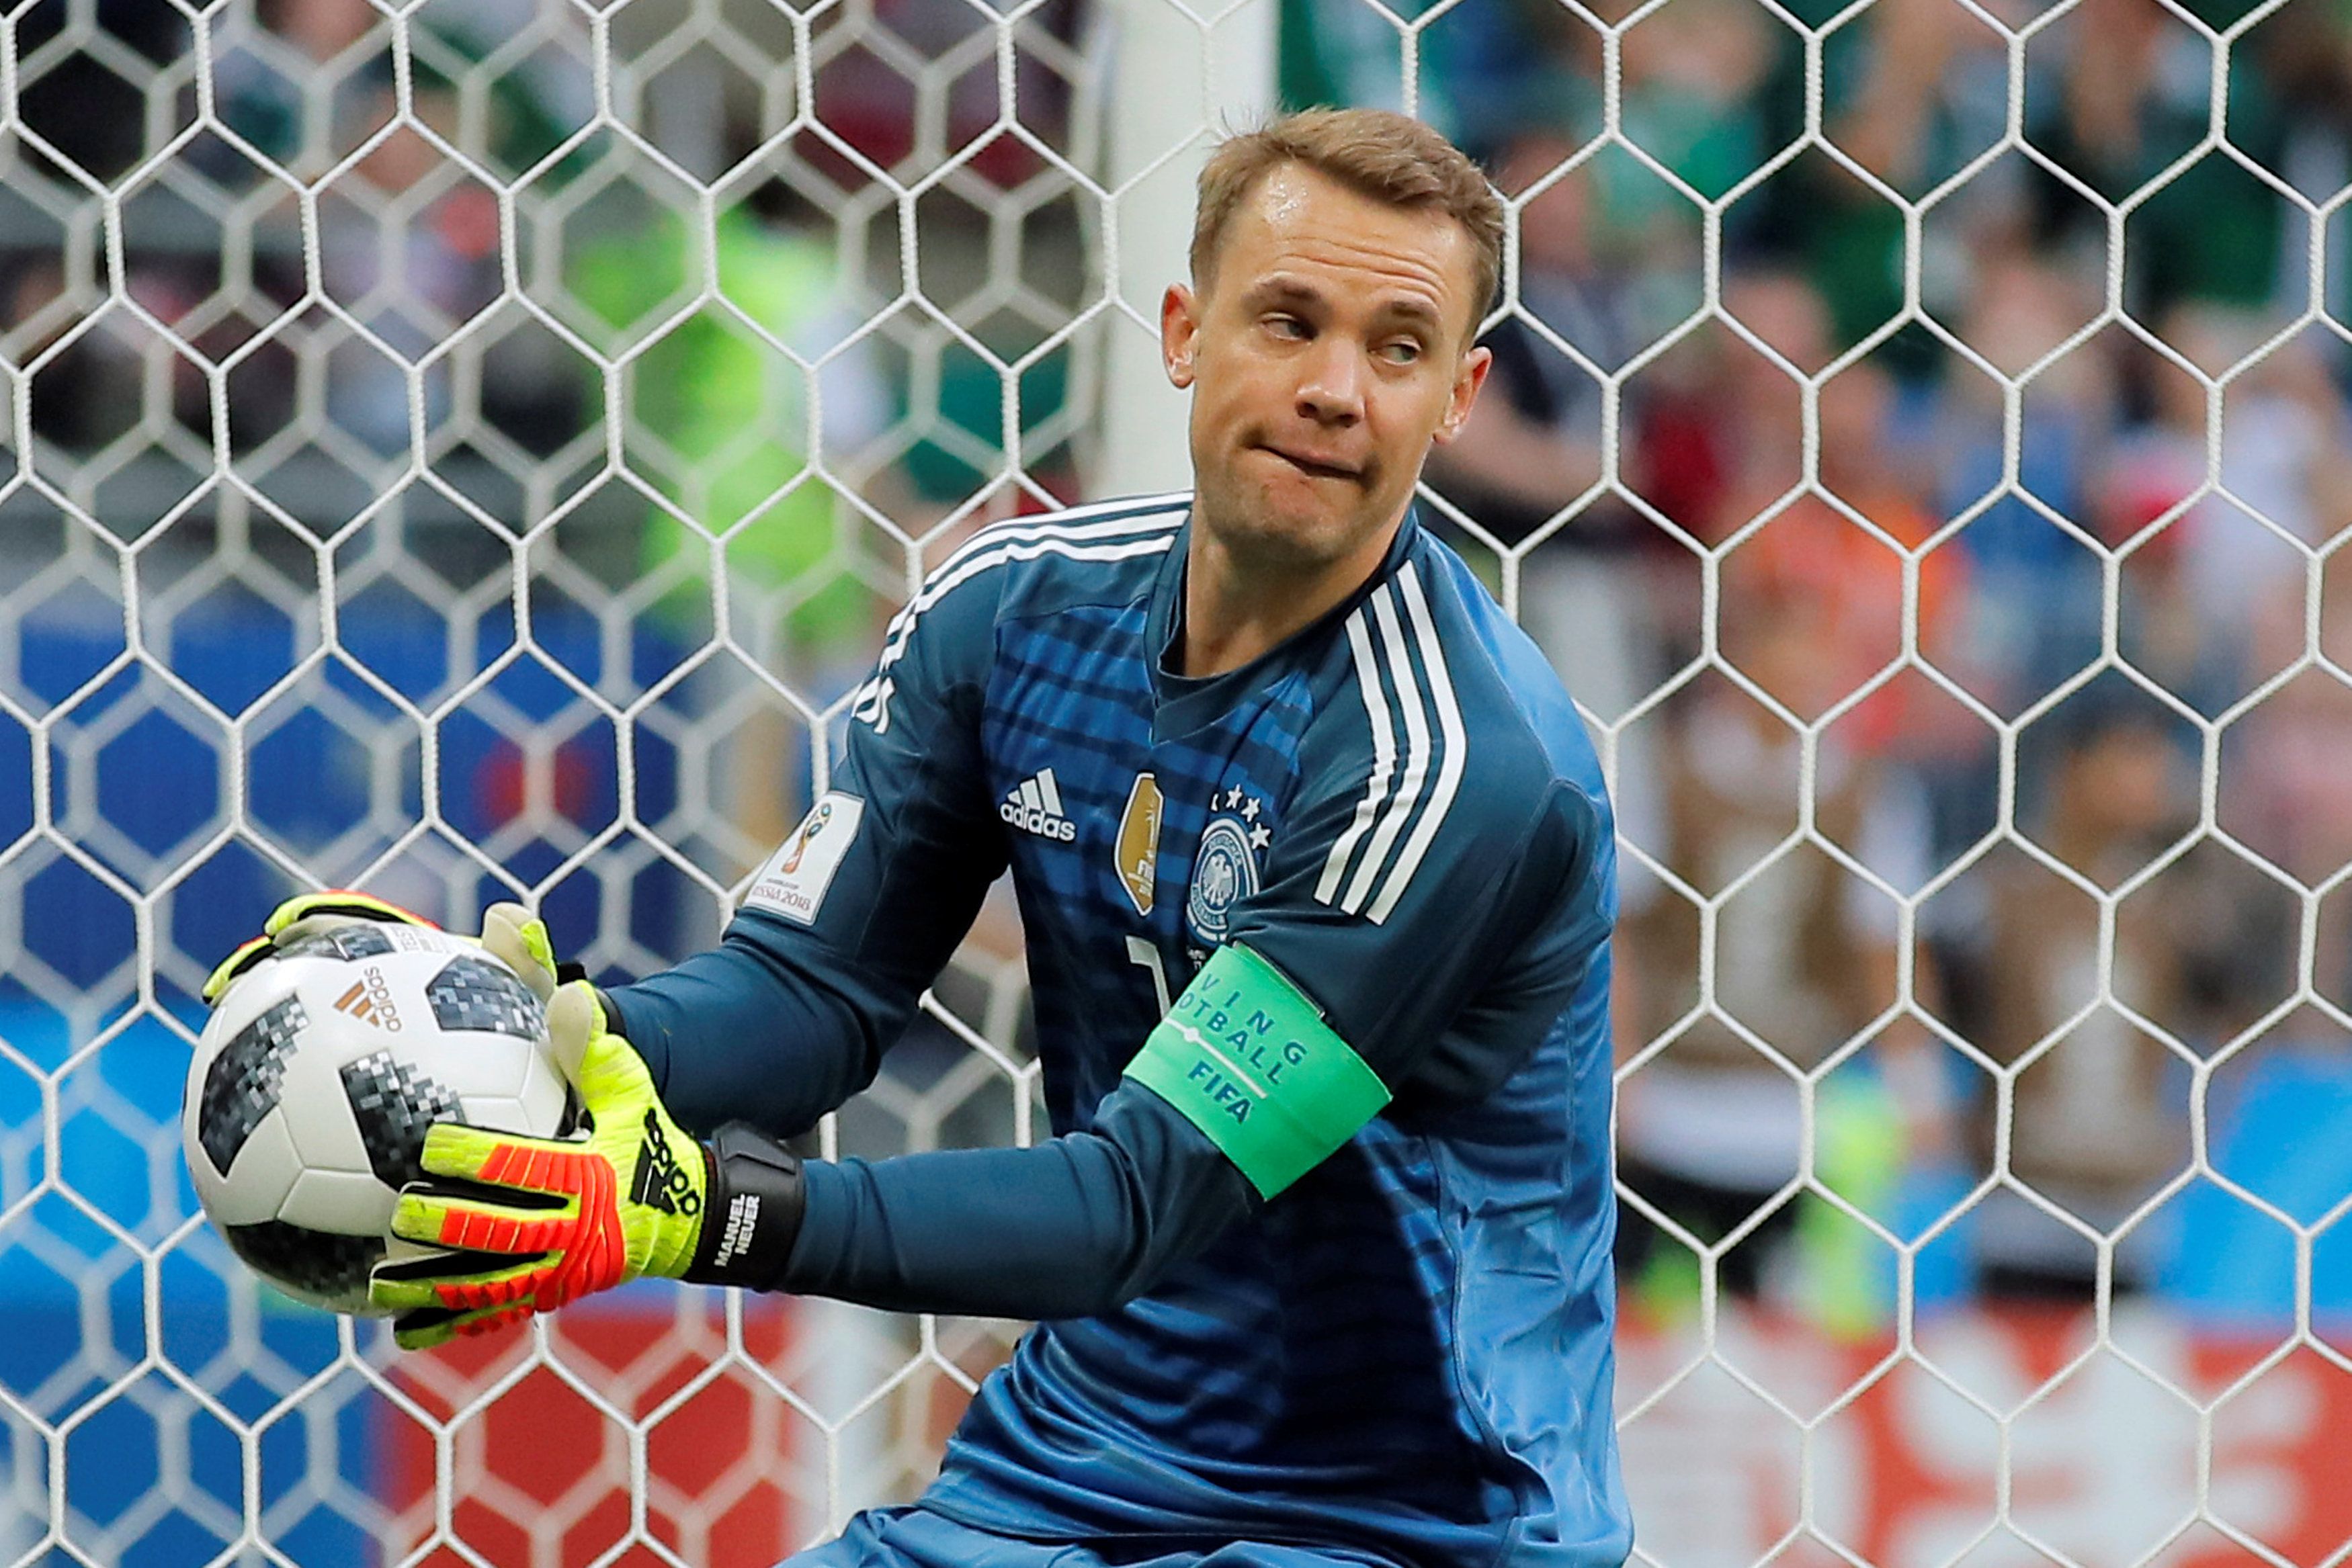 Every match is like a final for us now, says Germany captain Neuer